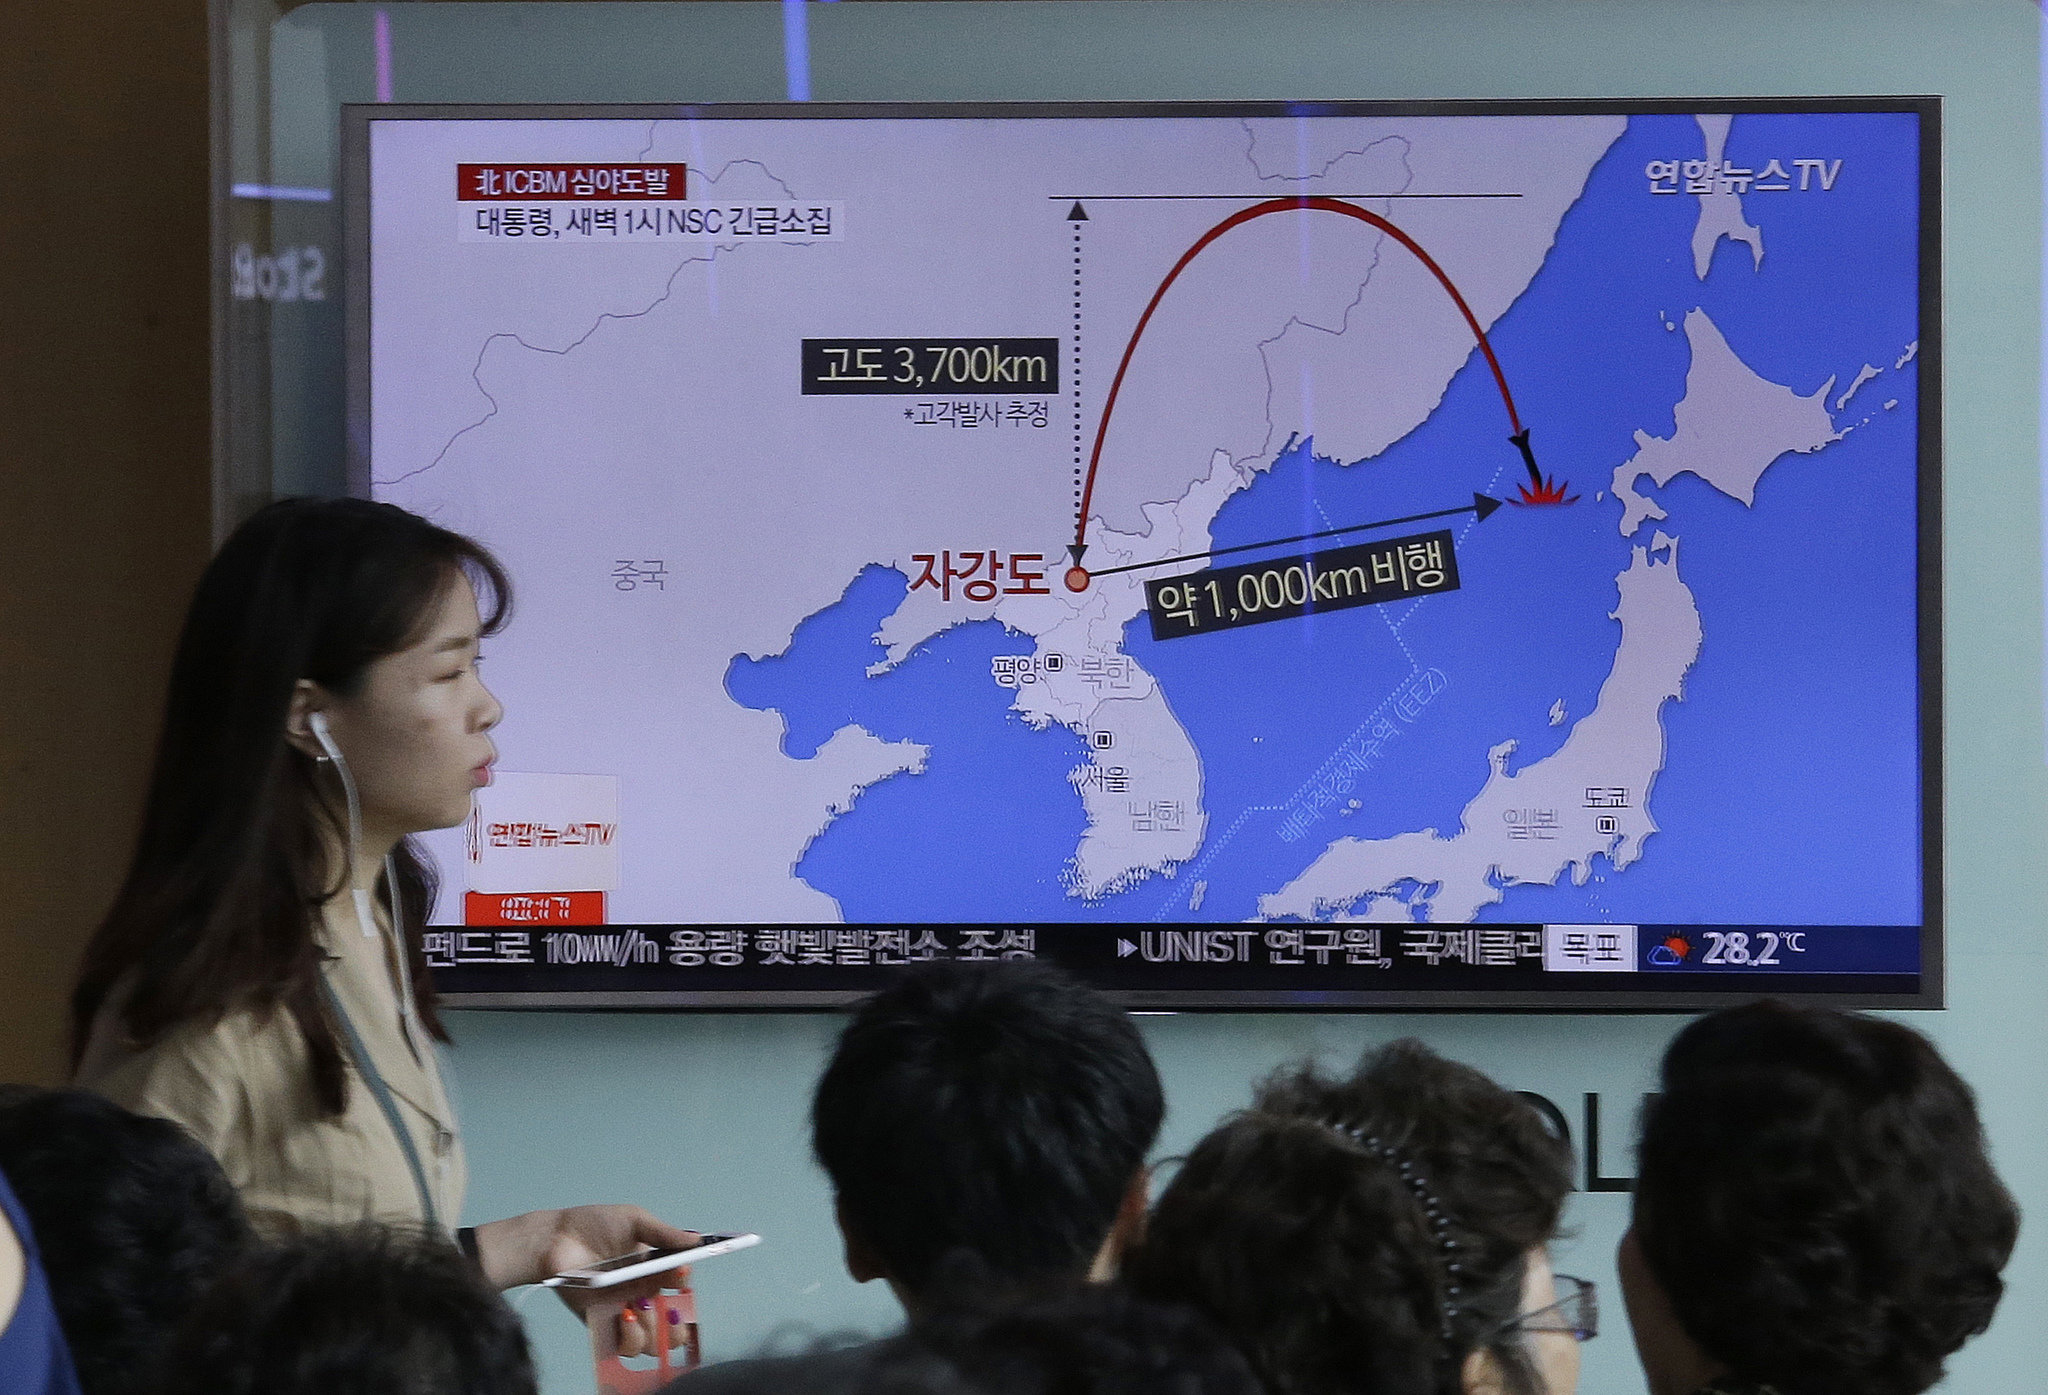 North Korea says new missile test proves it has capability to nuke any part of US